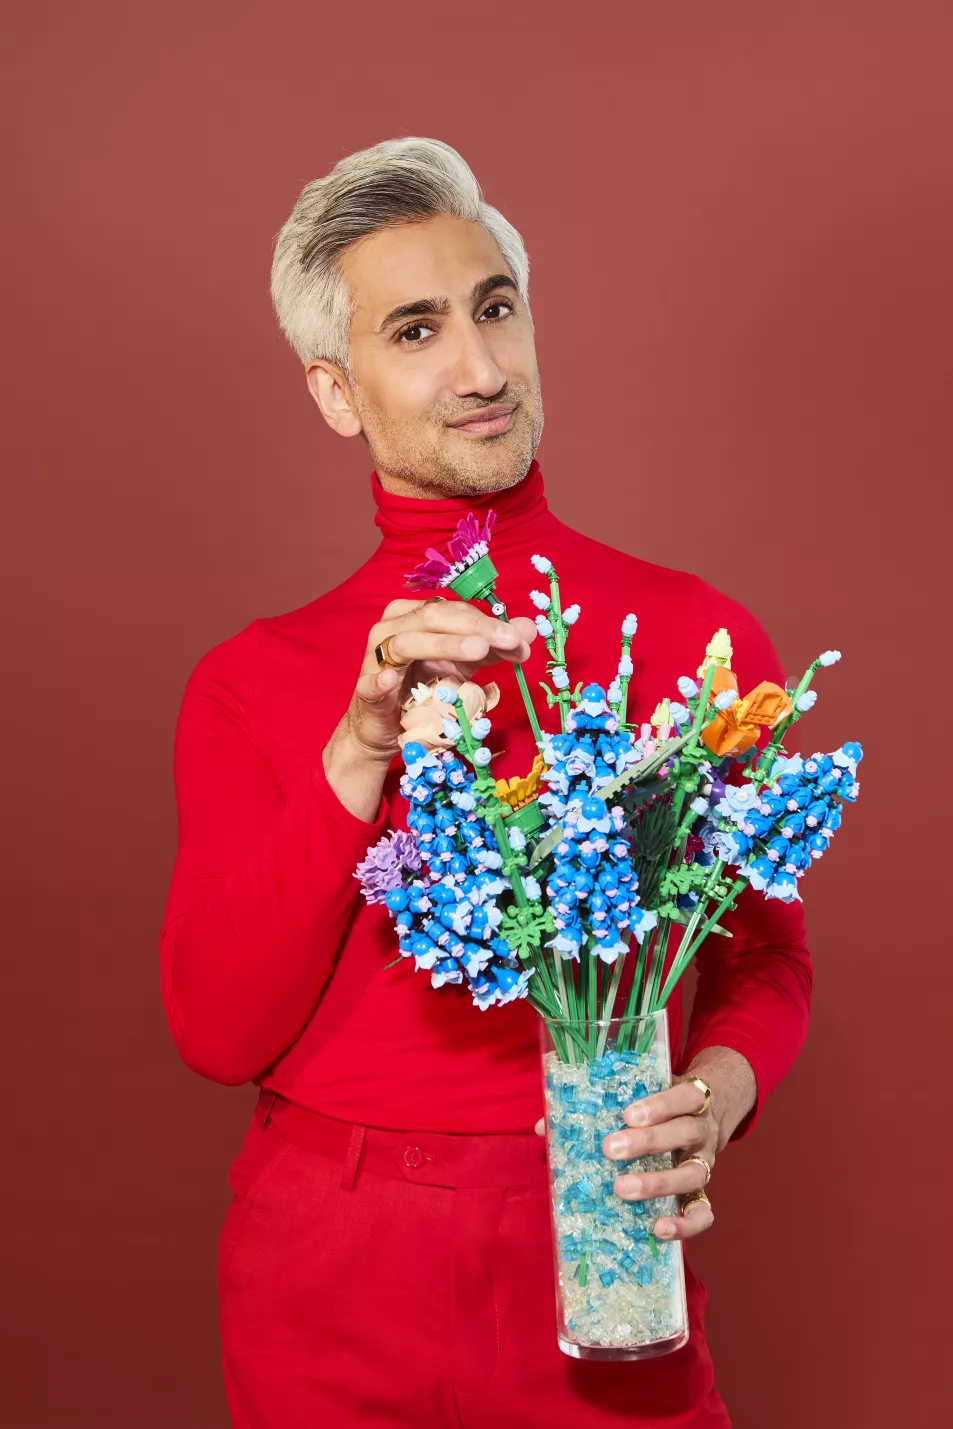 Tan France holding a vase of faux flowers